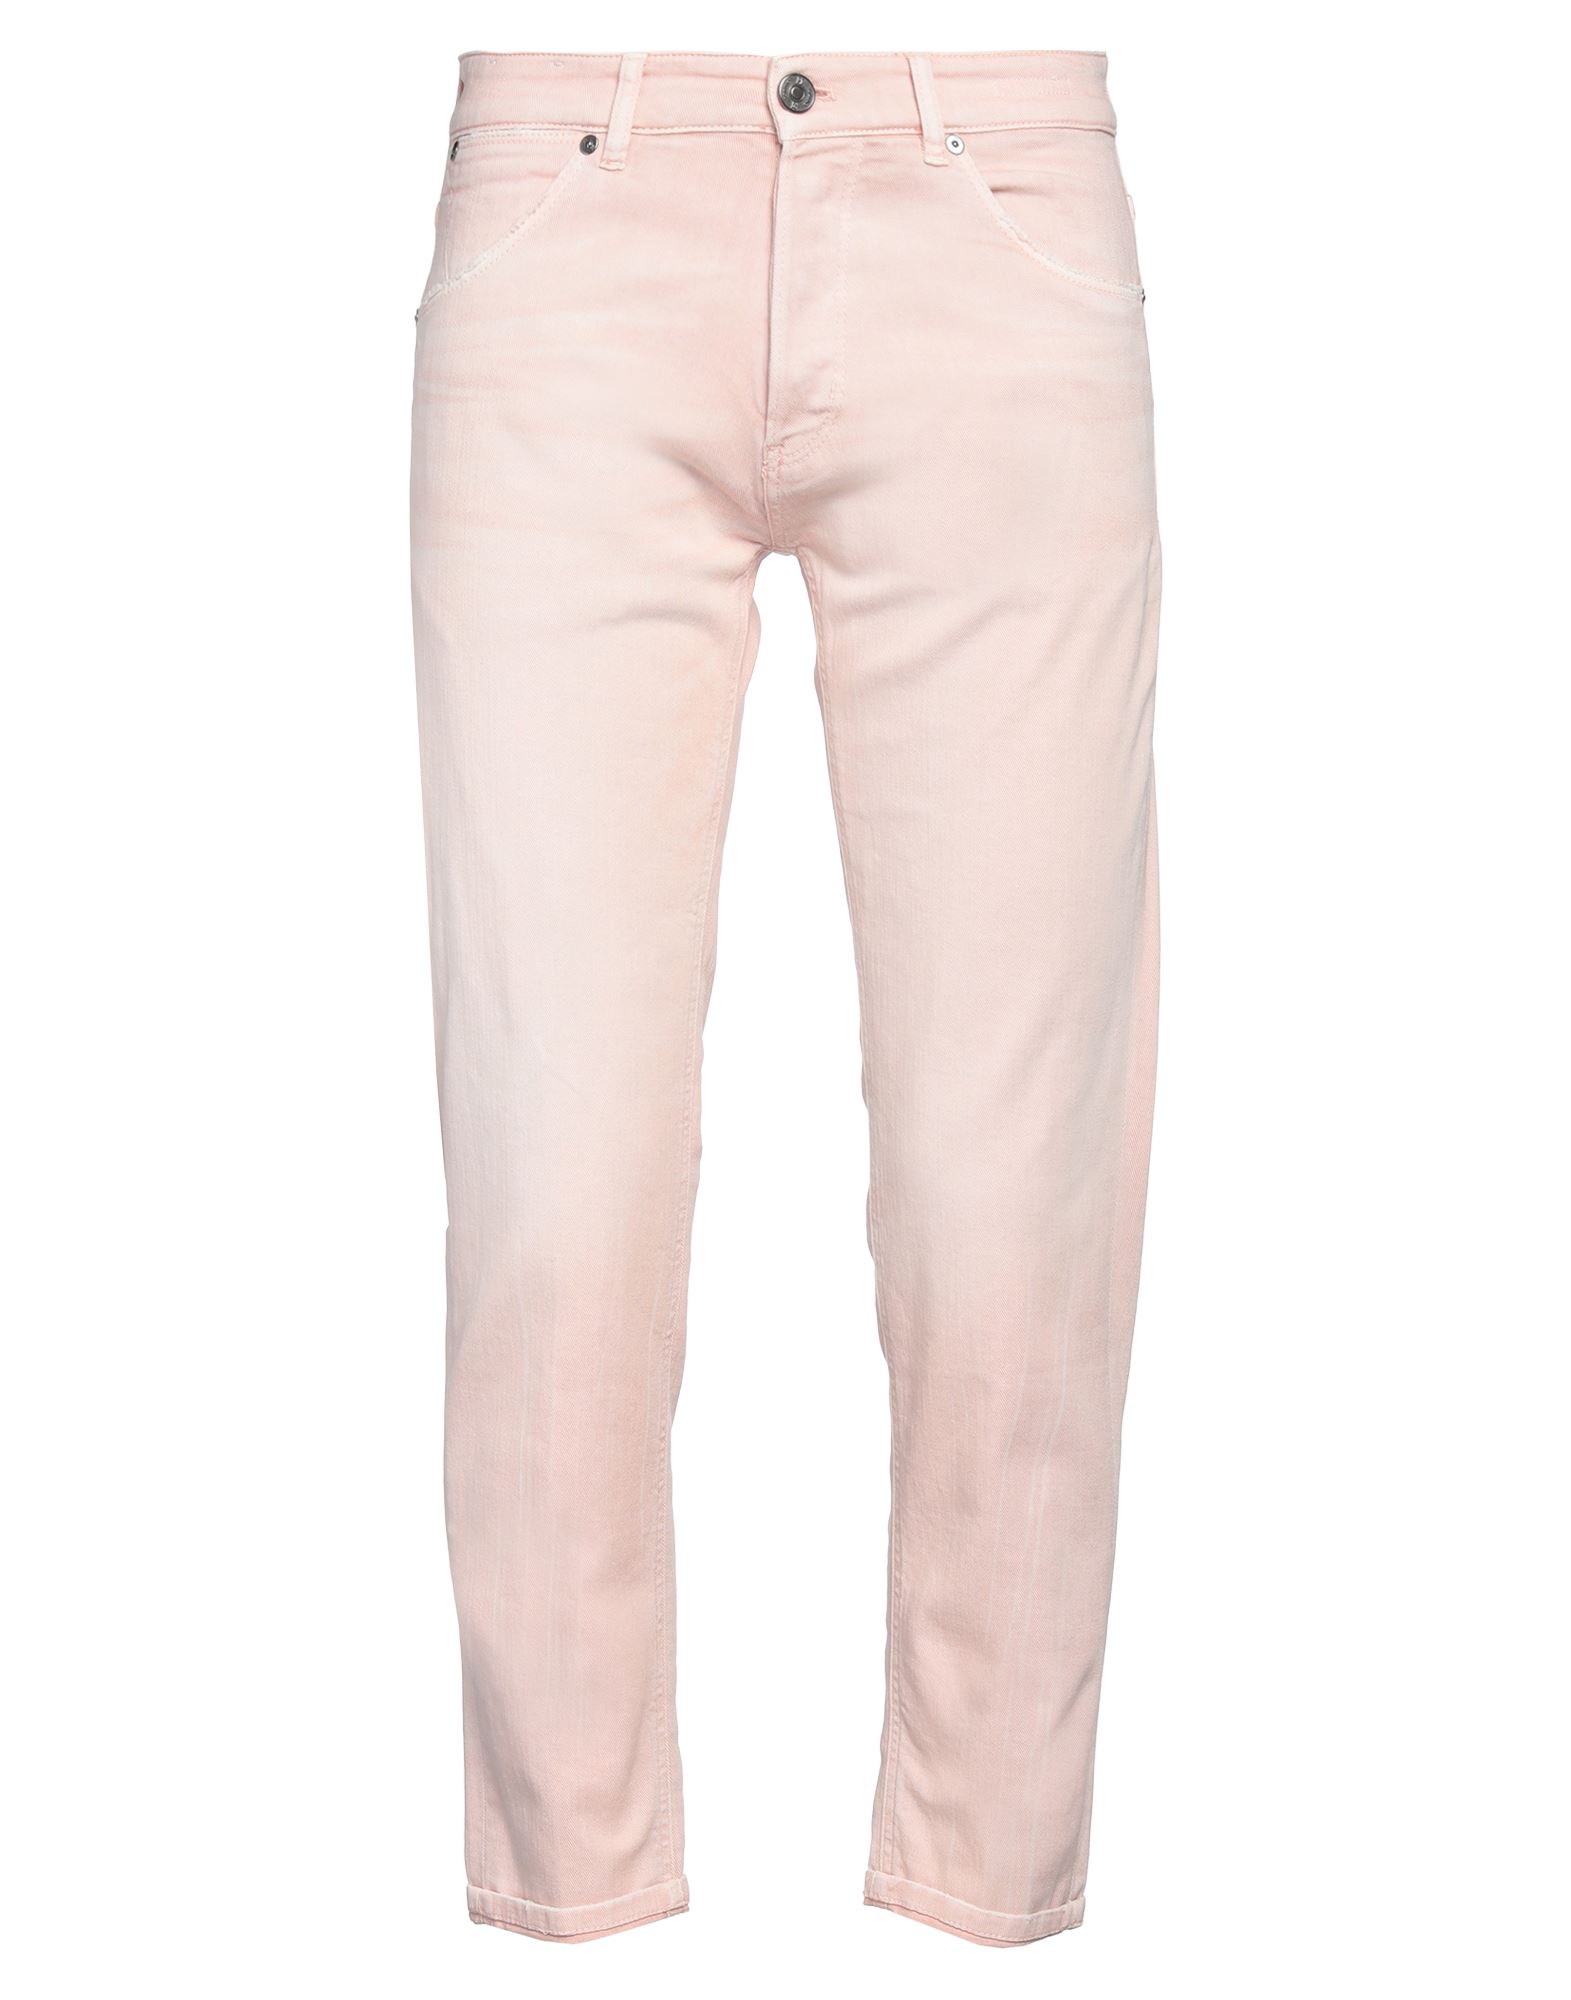 Pt Torino Jeans In Pink